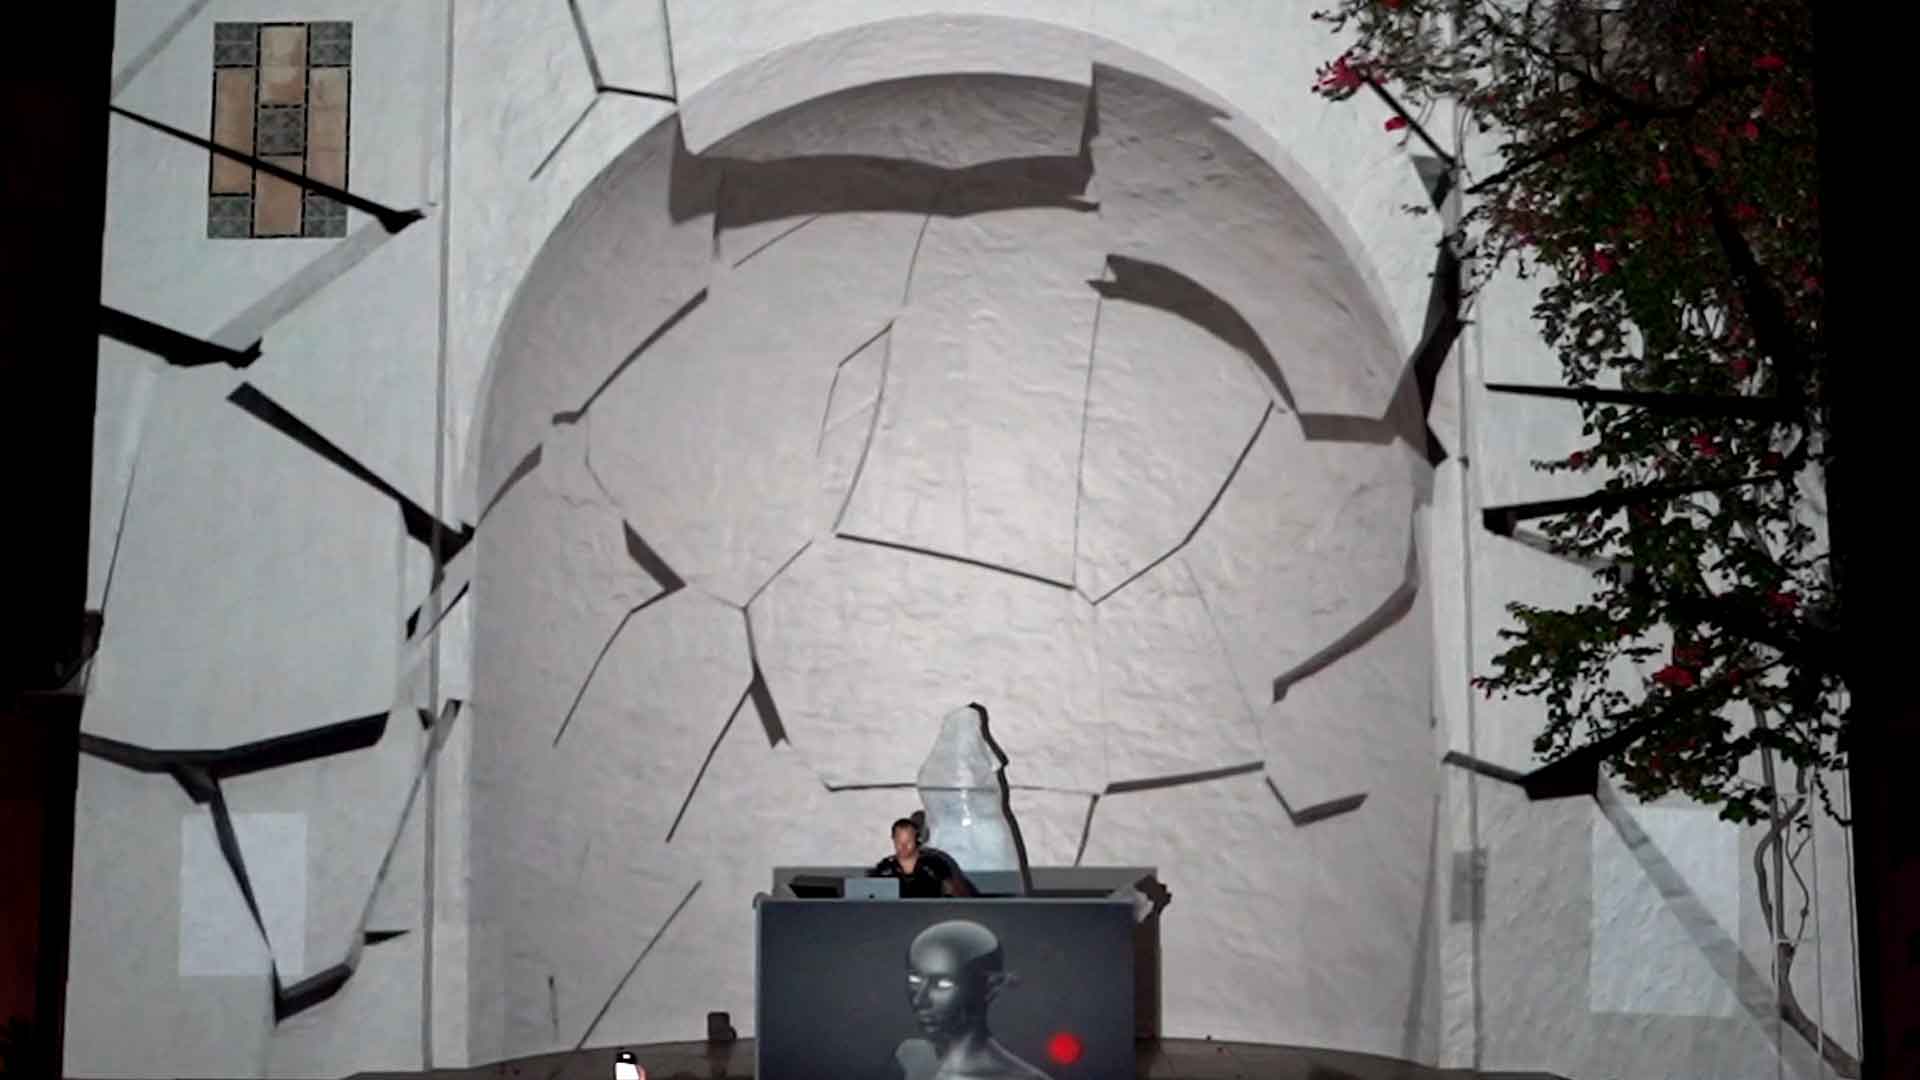 Load video: Vision District - Dominati Live 3d projection mapping set - honolulu museum of art